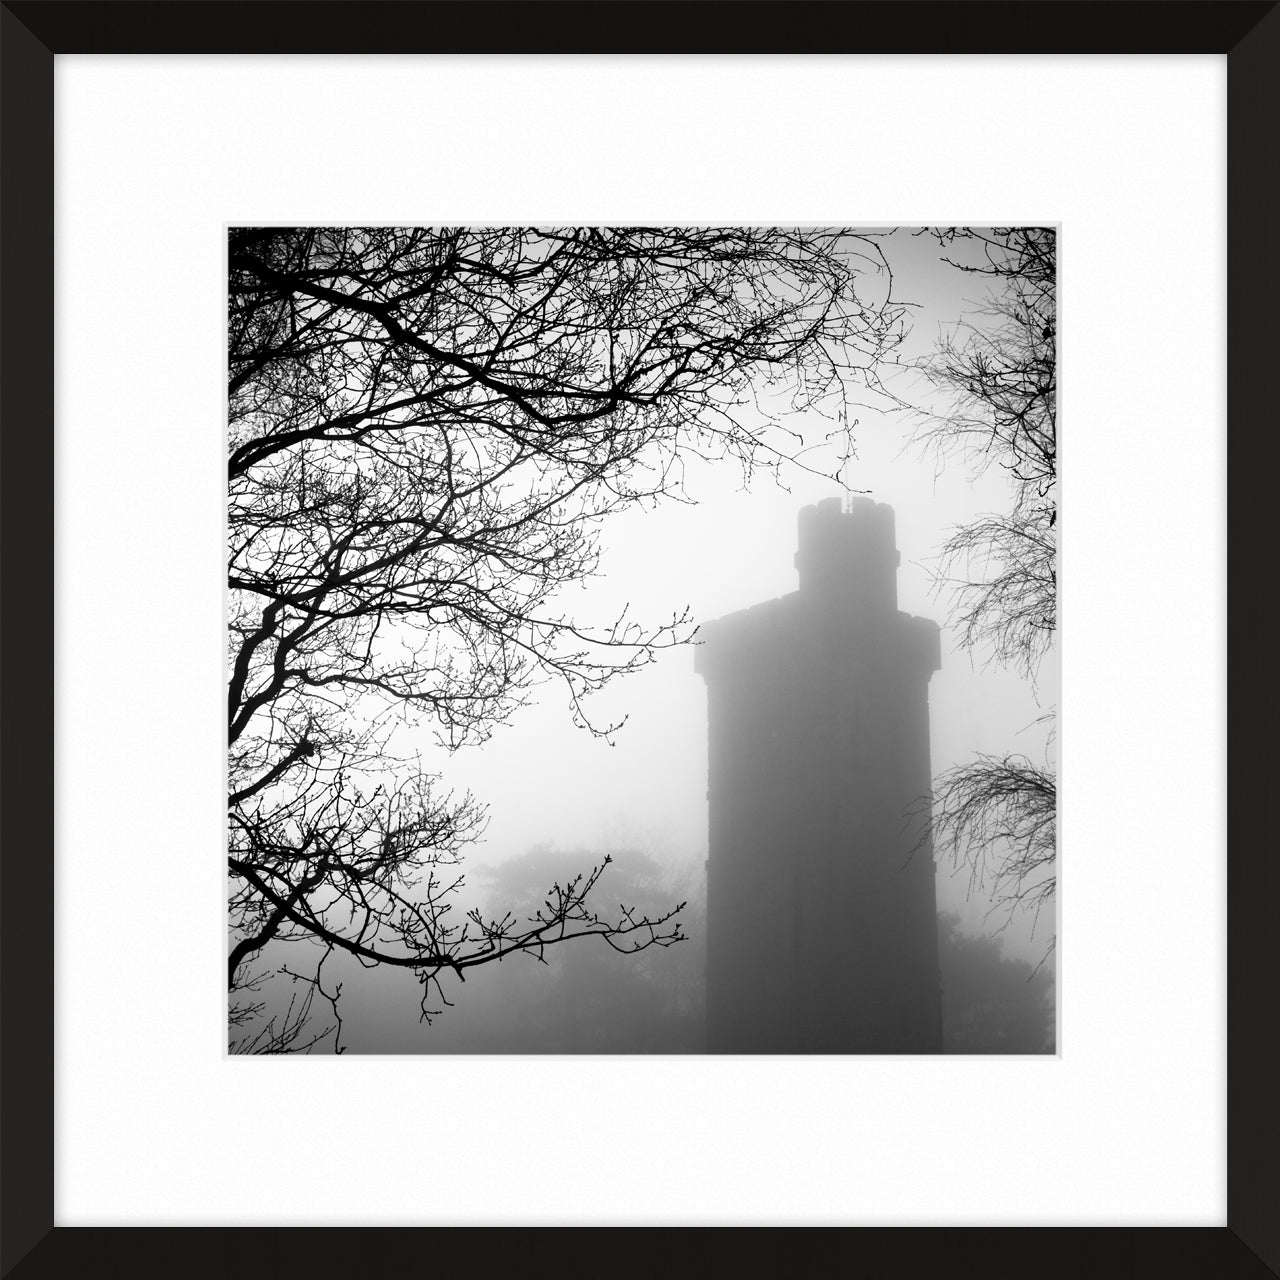 Leith Hill Tower, 2010